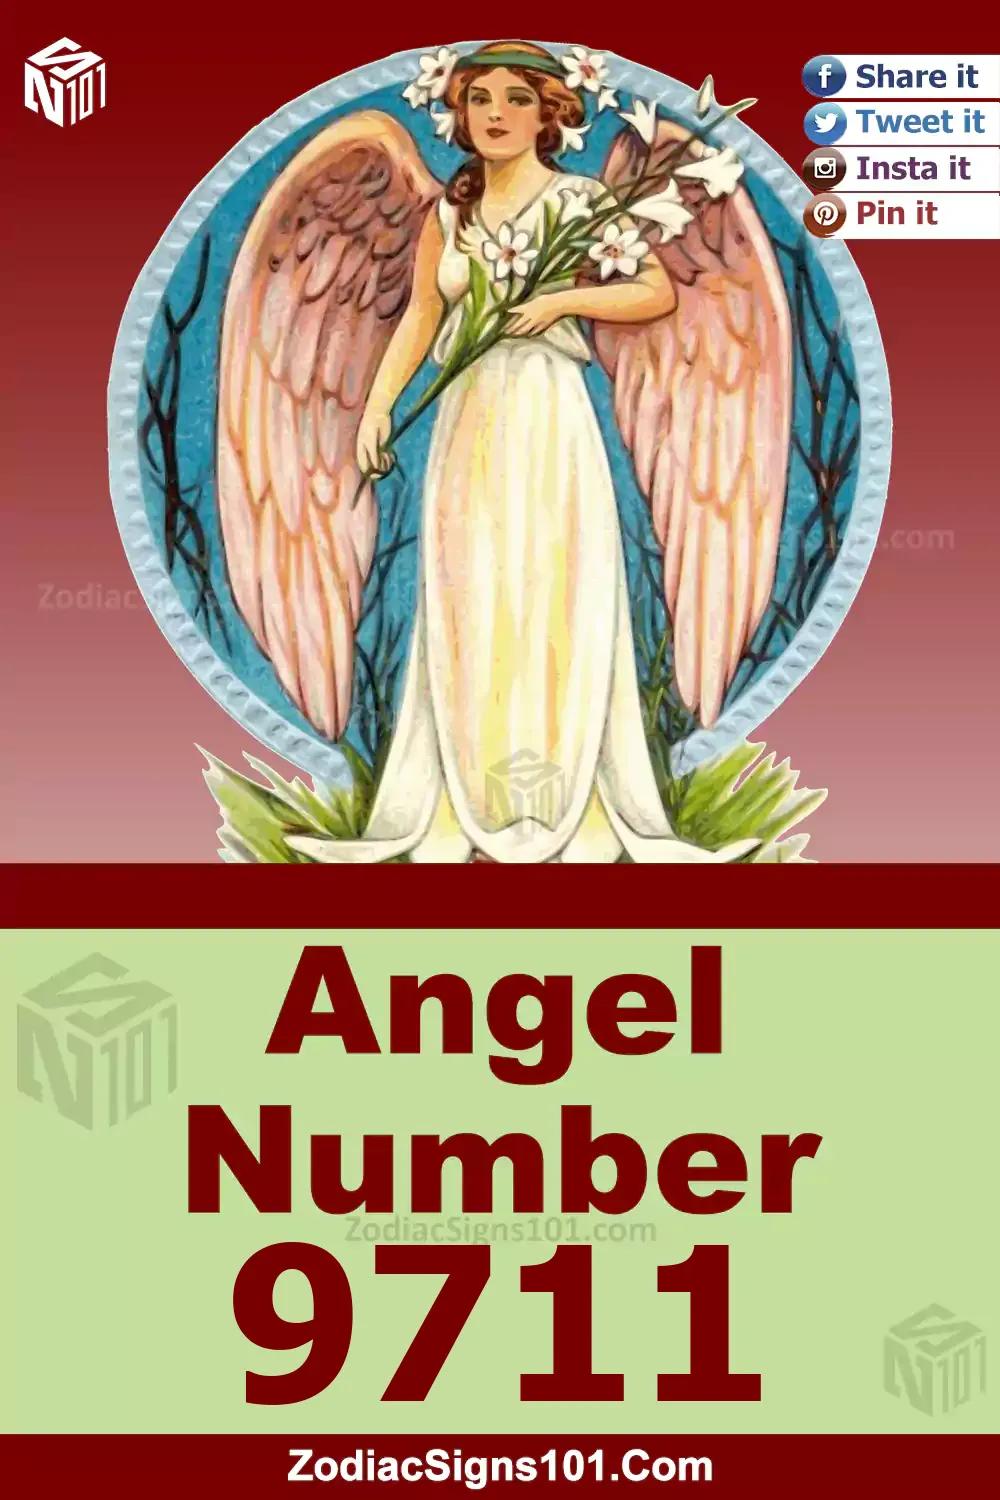 9711 Angel Number Meaning